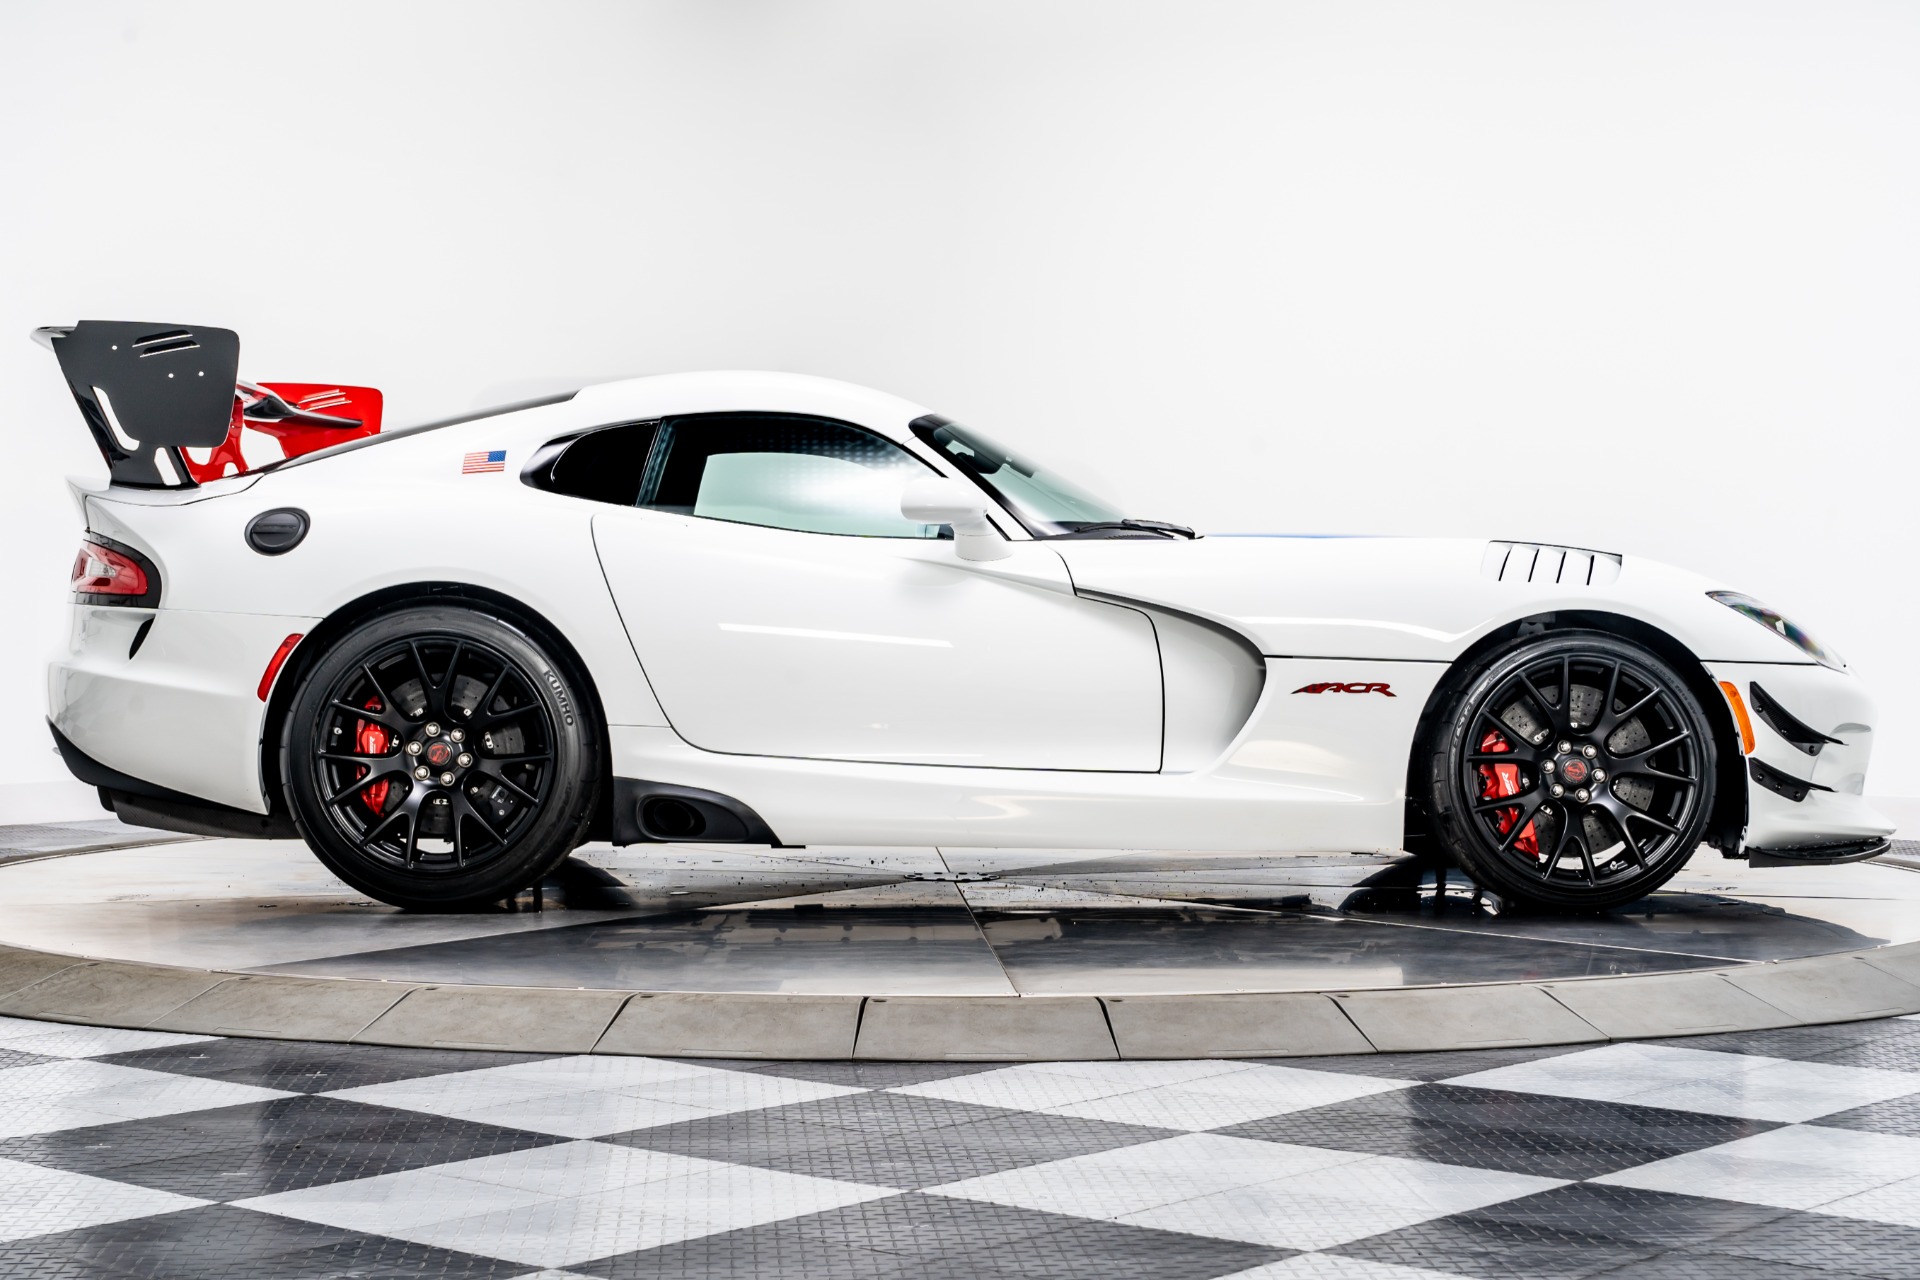 Used 17 Dodge Viper Acr Extreme Aero For Sale Sold Marshall Goldman Beverly Hills Stock W